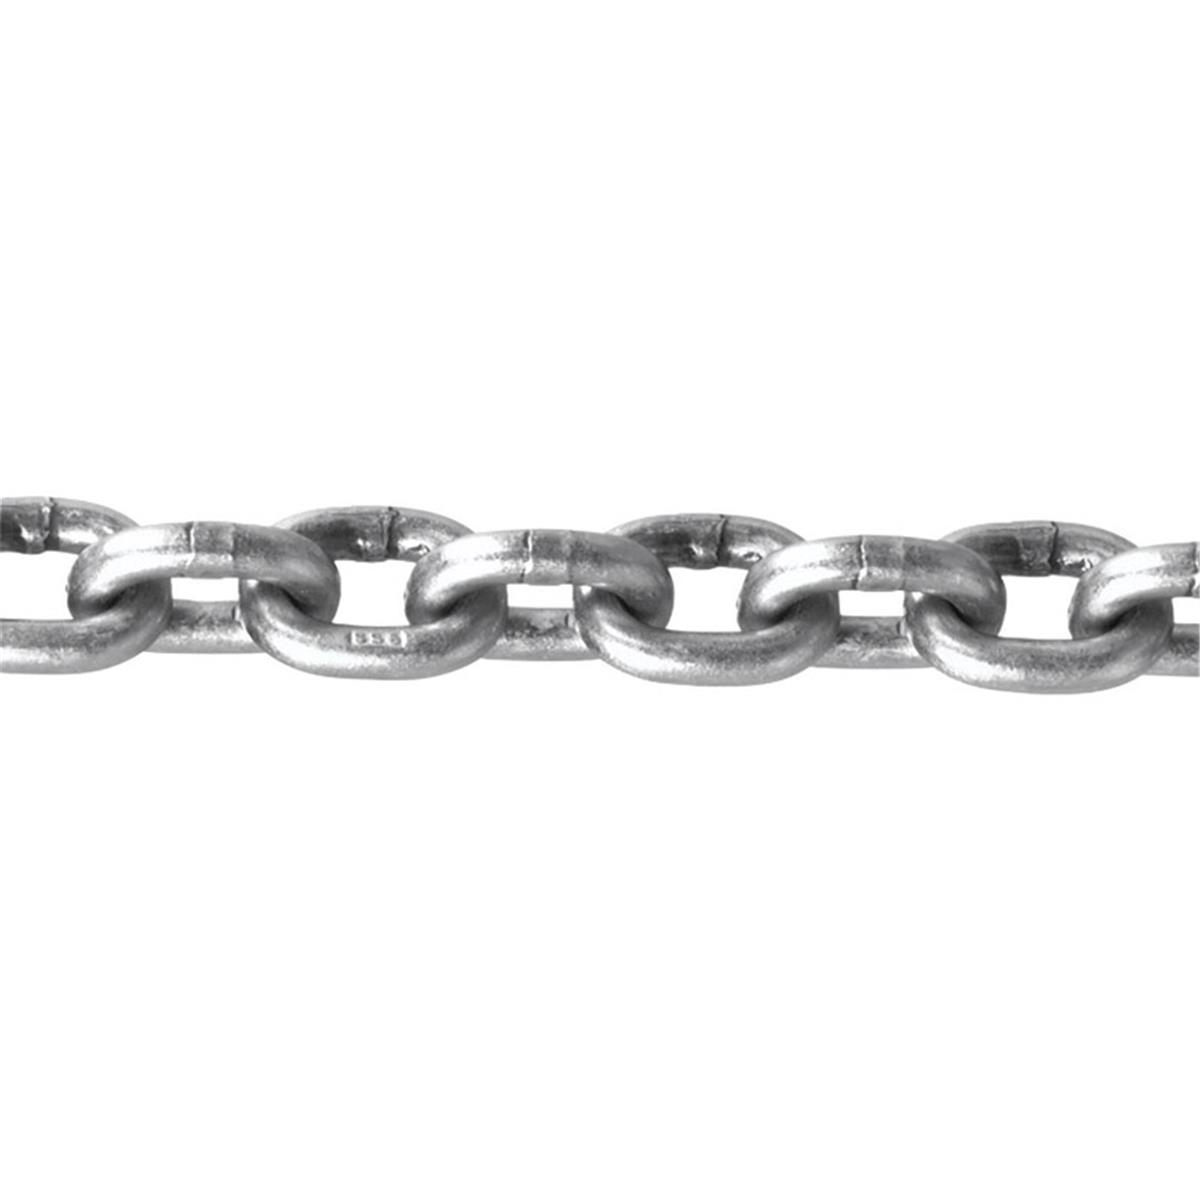 190424 50 Ft. X 0.15 In. Chain Stainless Steel